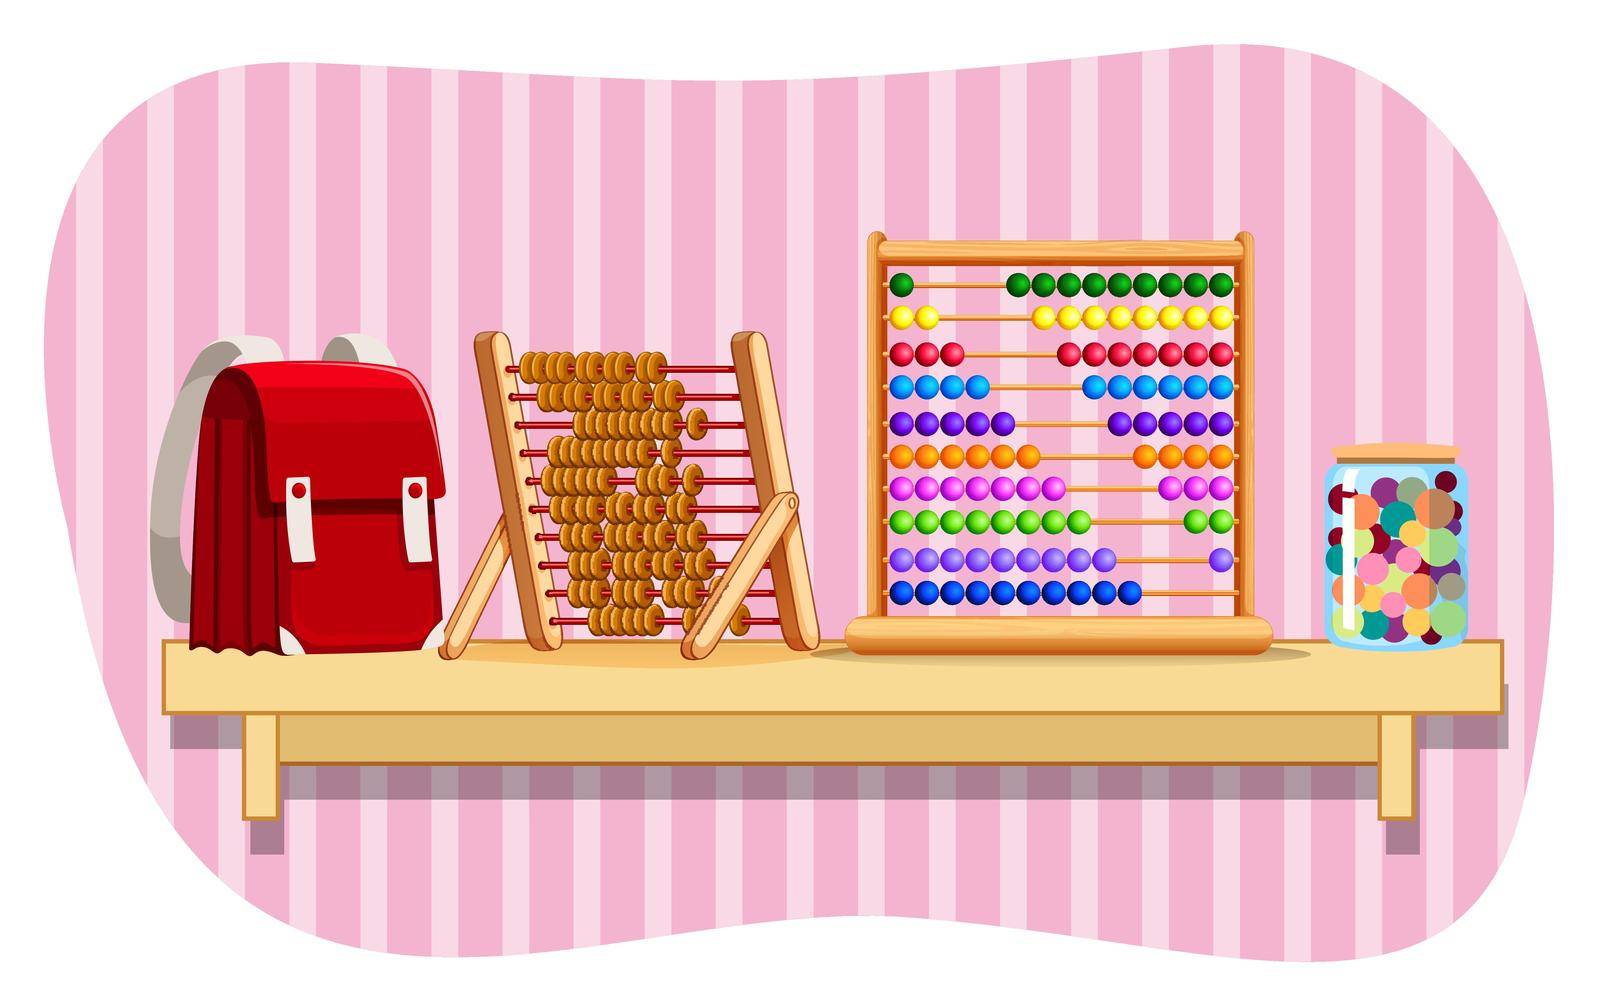 Schoolbag and abacus on shelf by iimages